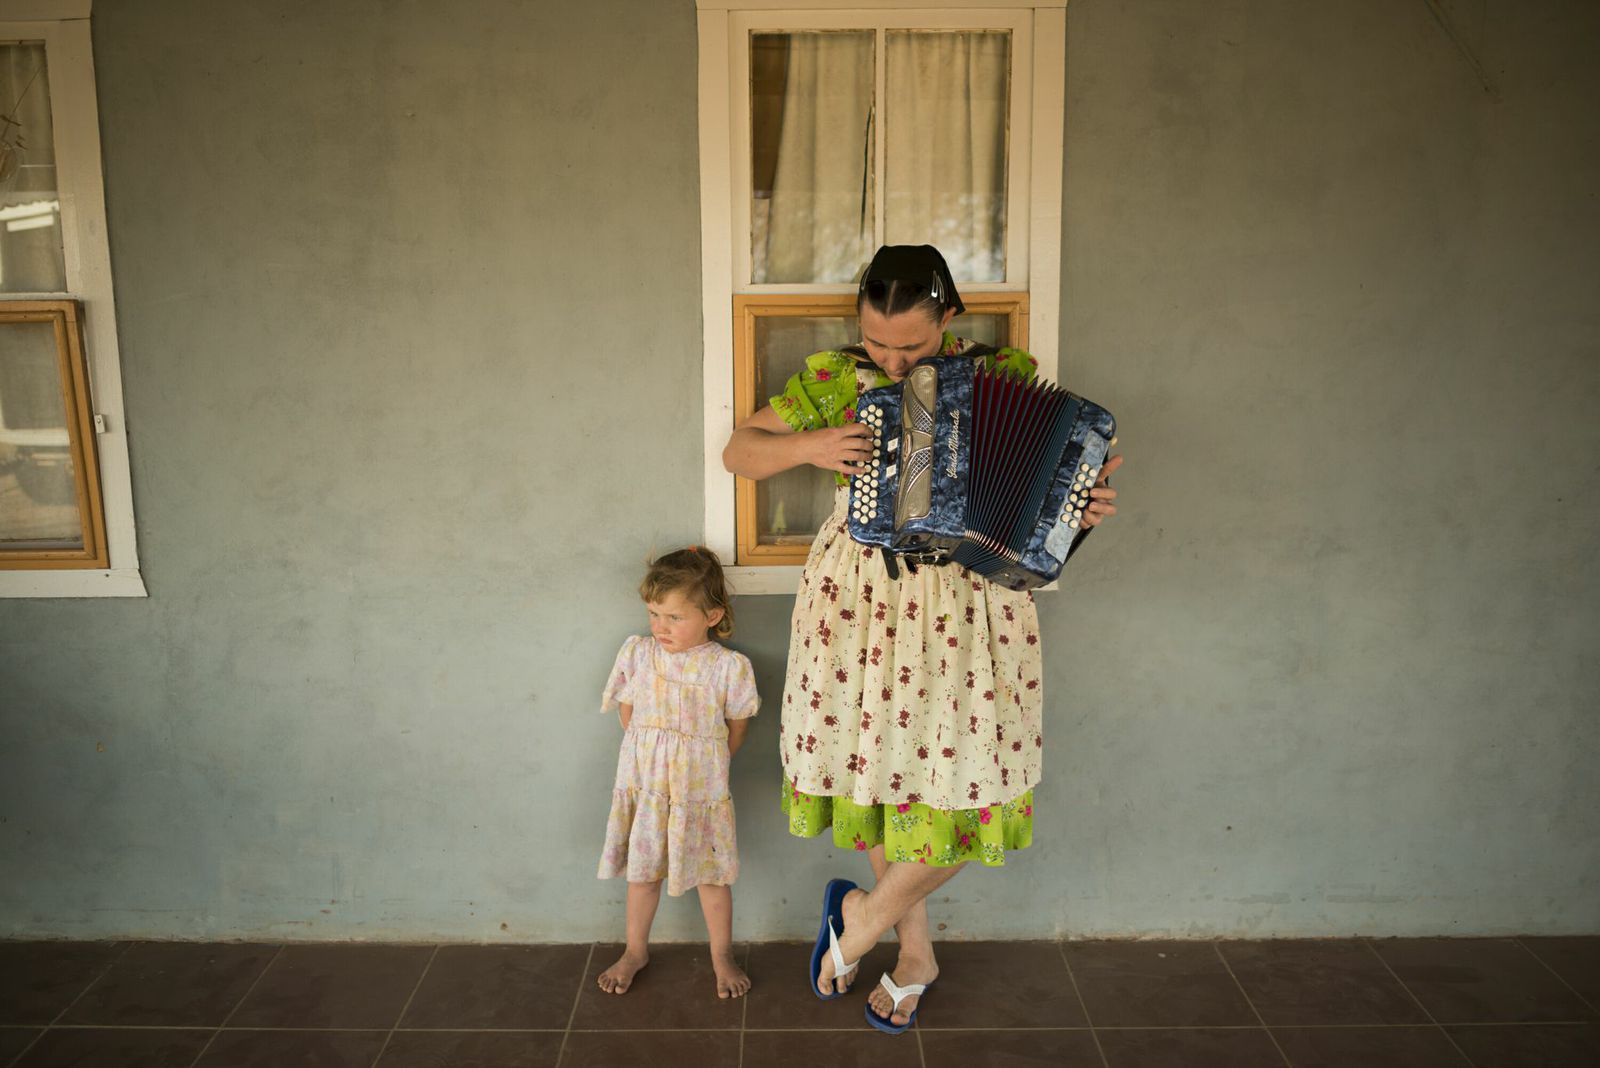 Margarita Wall is seen playing the accordion next to her daughter in Colonia Sommerfeld, Bolivia.